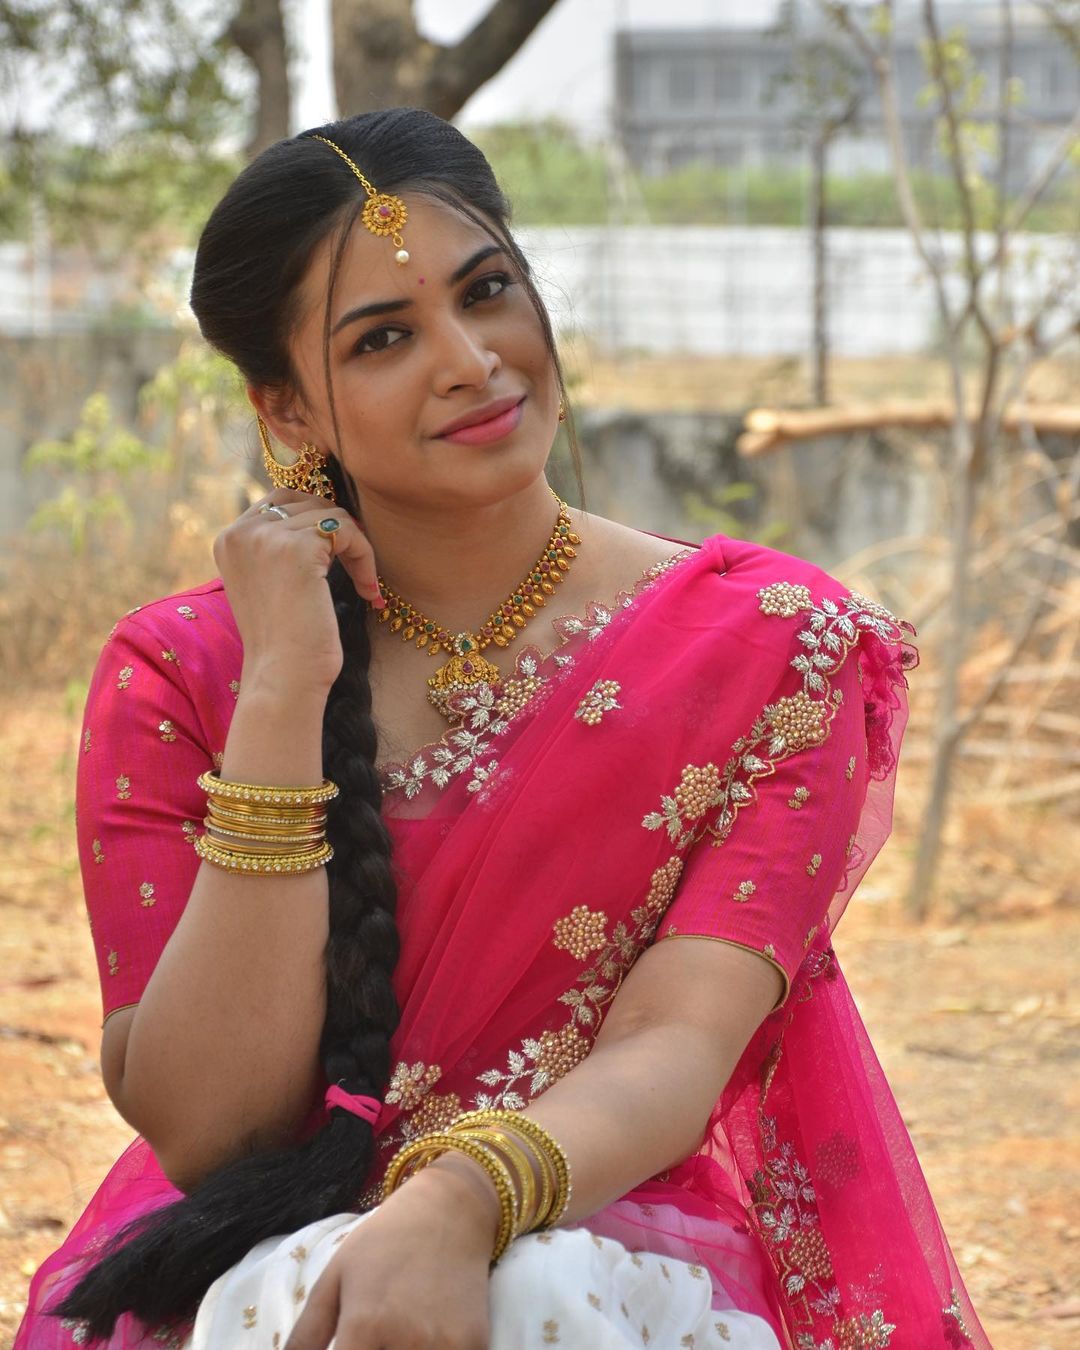 South Indian Tv Anchor Model Meghana Photoshoot In White Half Saree 